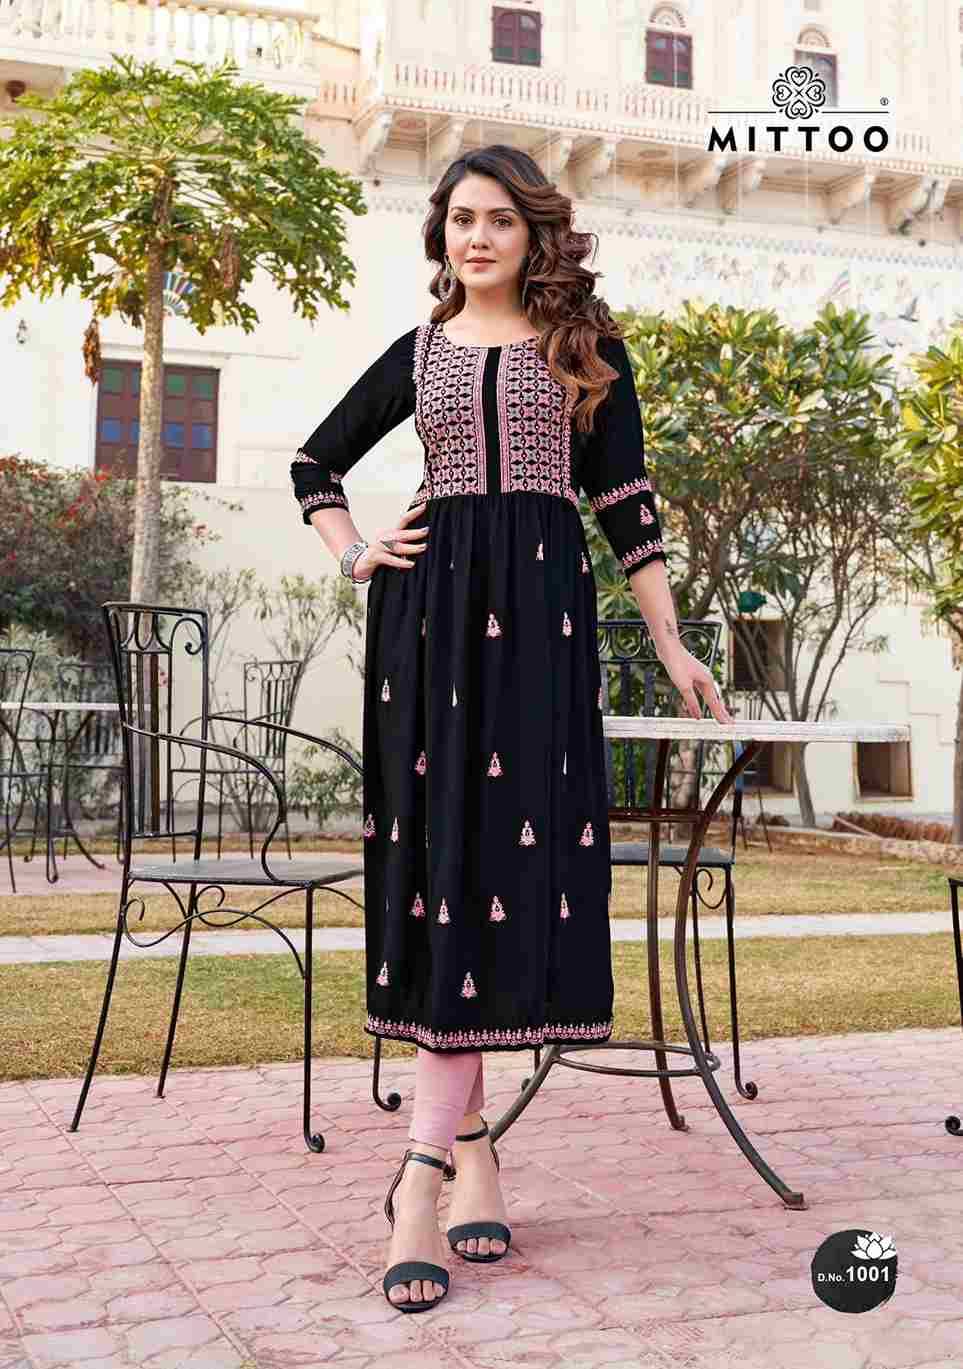 Paaneri By Mittoo 1001 To 1004 Series Designer Stylish Fancy Colorful Beautiful Party Wear & Ethnic Wear Collection Rayon Kurtis At Wholesale Price